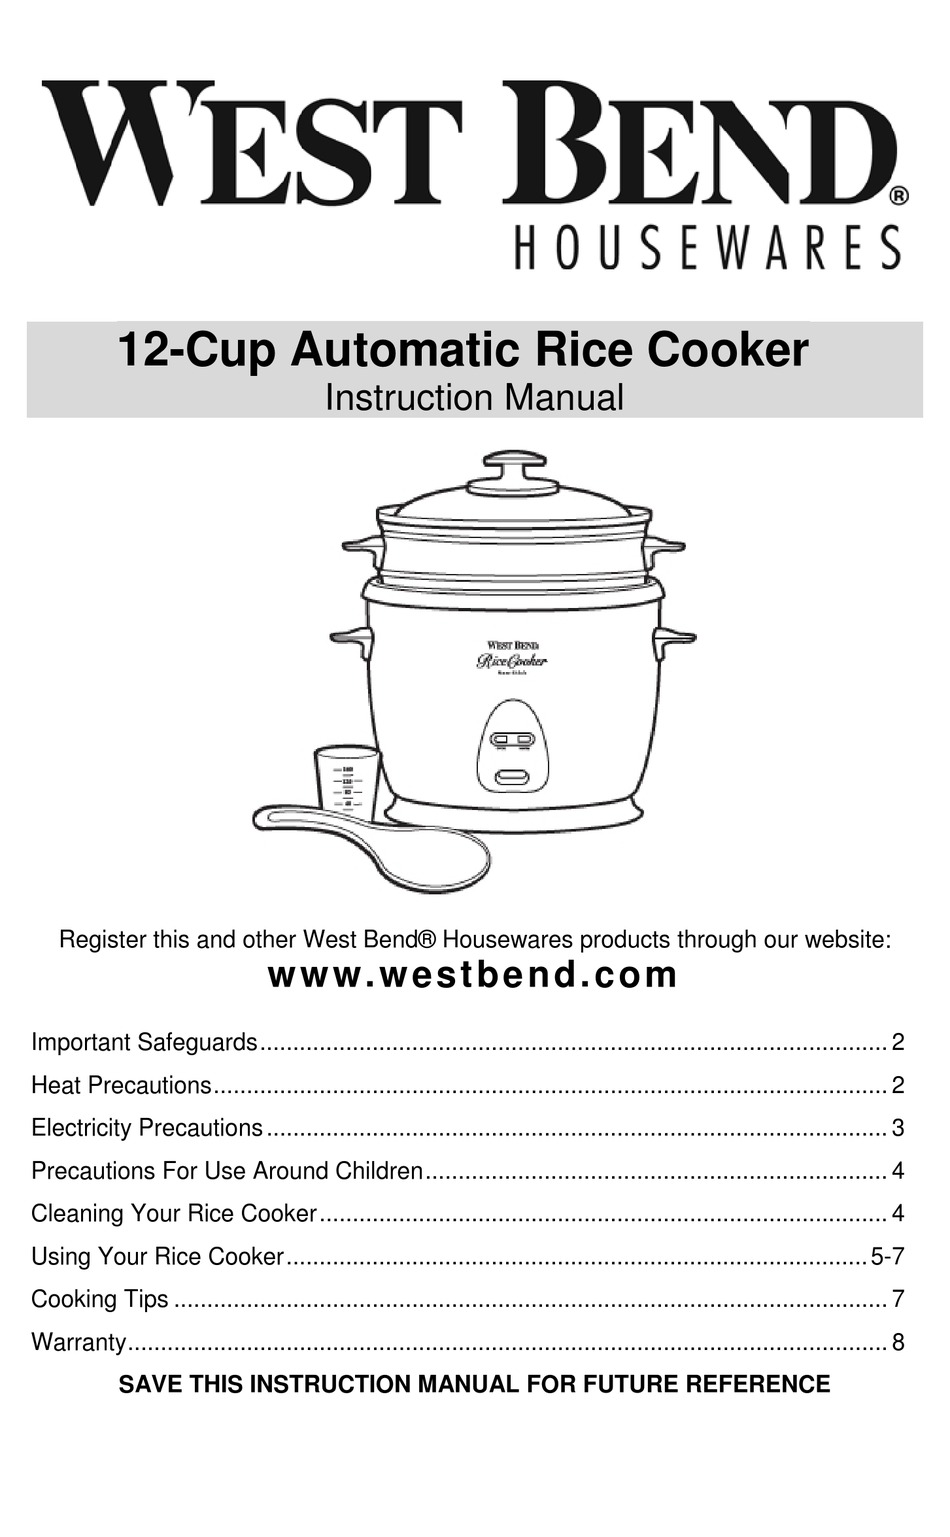 https://data2.manualslib.com/first-image/i4/19/1900/189986/west-bend-12-cup-automatic-rice-cooker.jpg